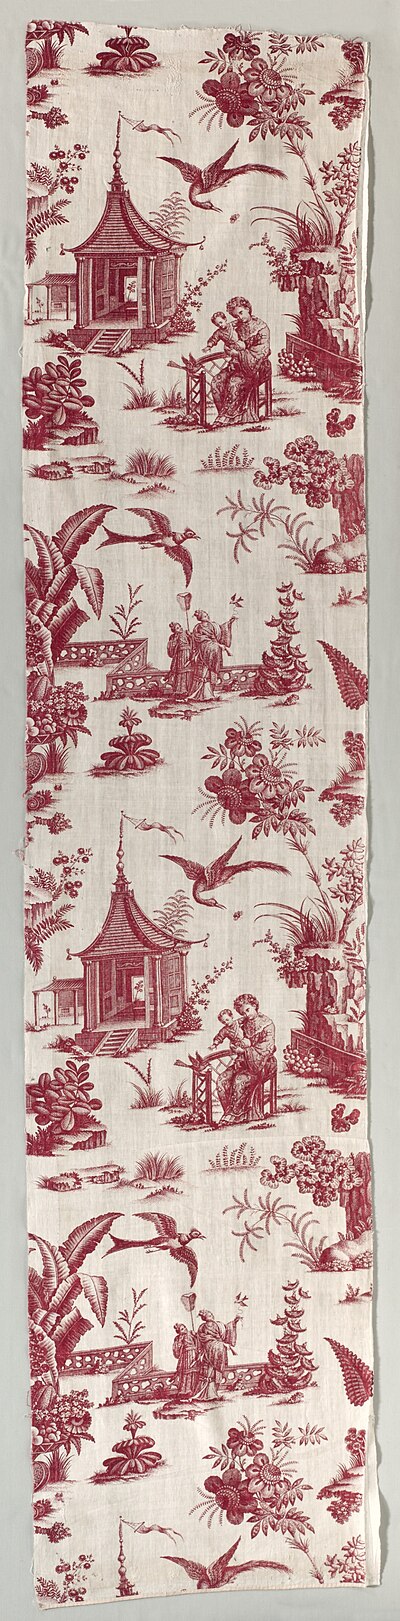 Thumbnail for File:England, Chambers, 18th century - Copperplate-Printed Cotton - 1940.39 - Cleveland Museum of Art.jpg